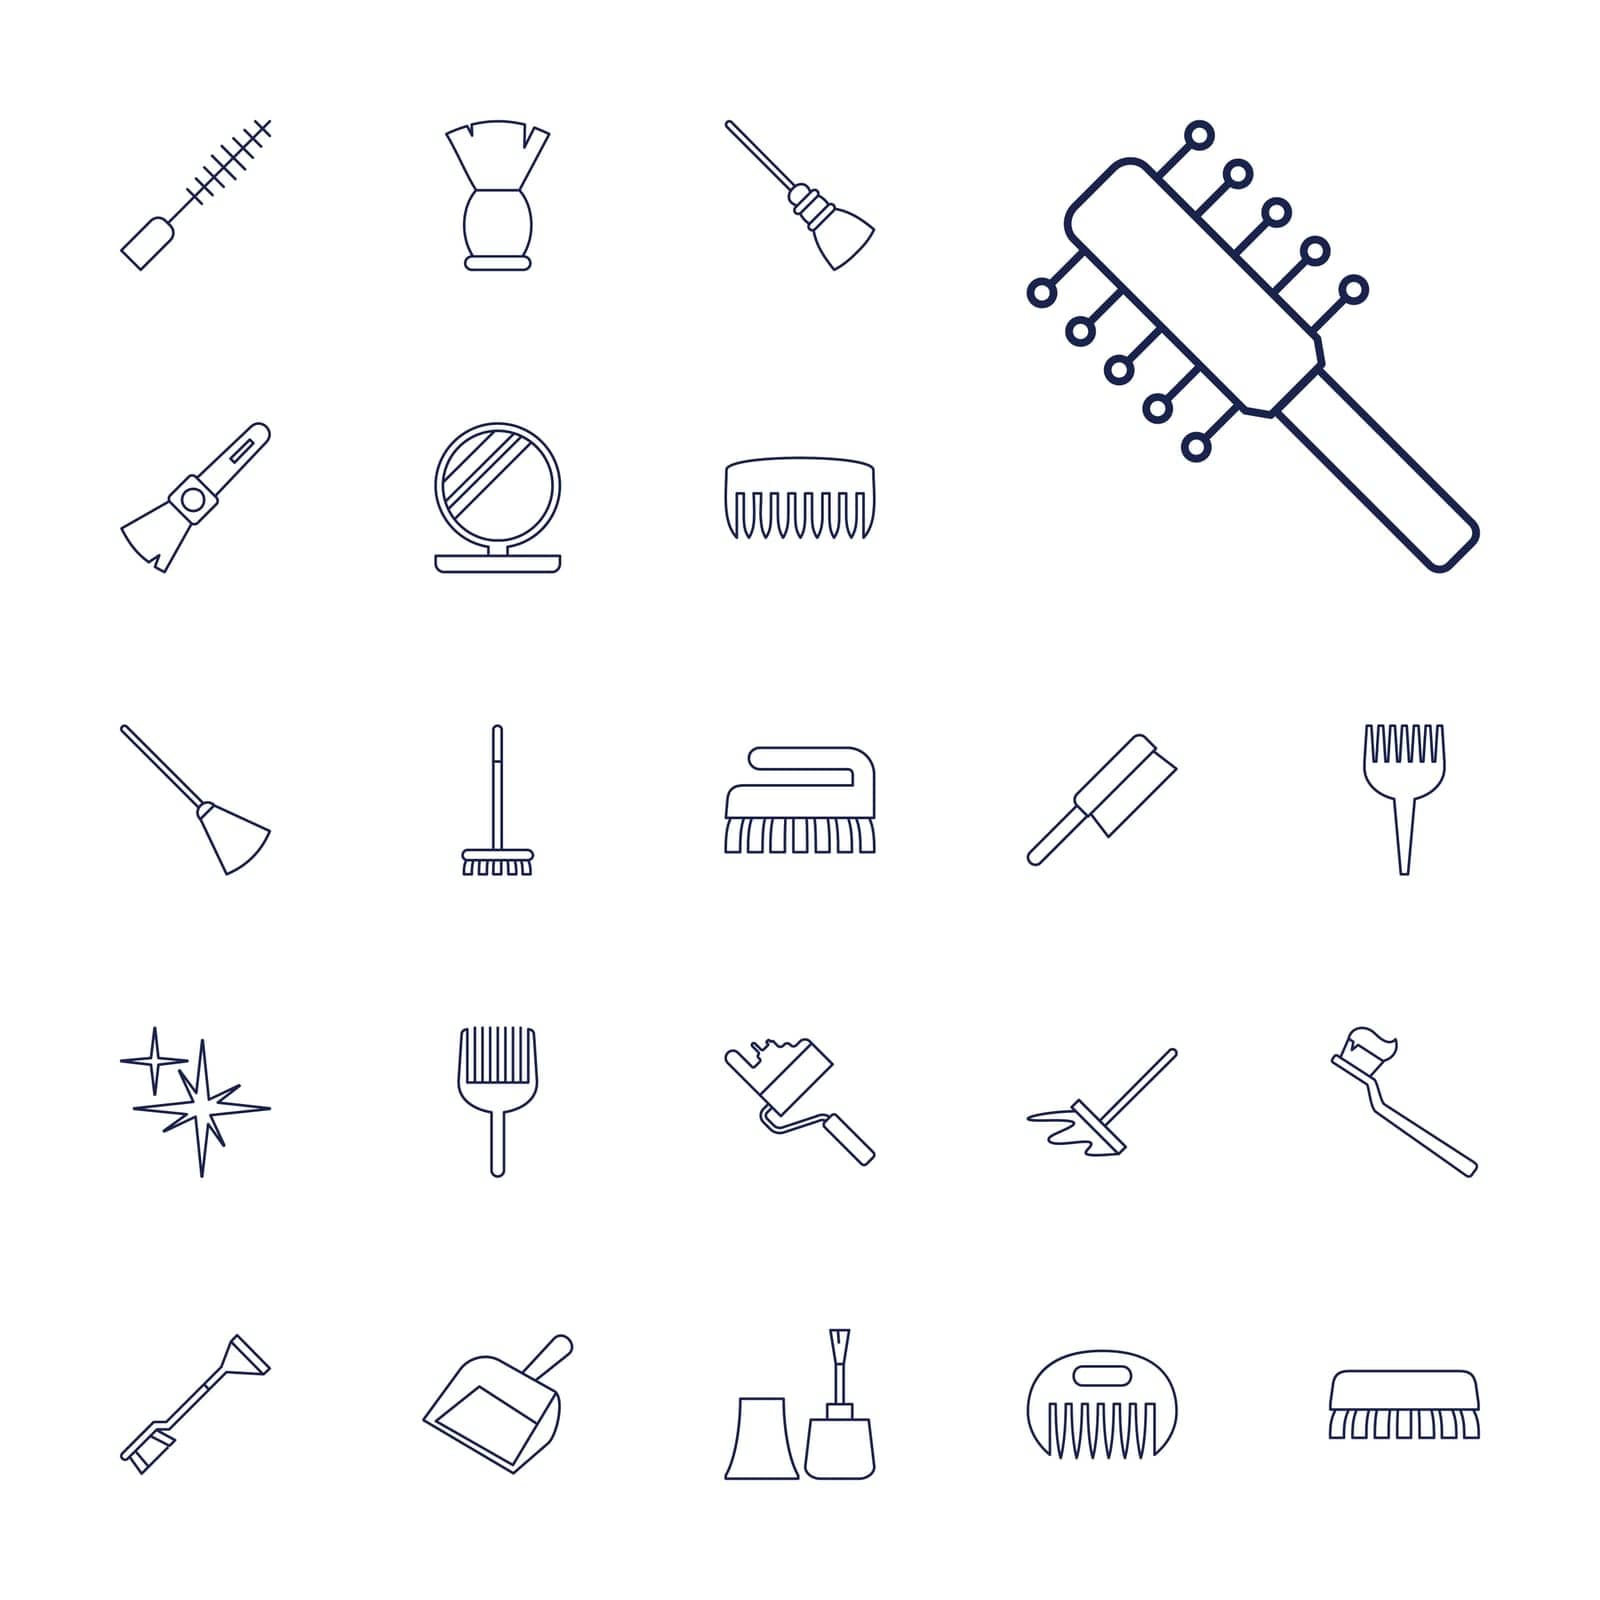 symbol,beauty,icon,sign,isolated,toothbrush,dustpan,powder,mop,hair,white,hygiene,design,coloring,vector,barber,graphic,tooth,brush,set,nail,work,broom,equipment,shaving,clean,tool,comb,background,style,illustration,polish,mascara,roller,object,care by ogqcorp